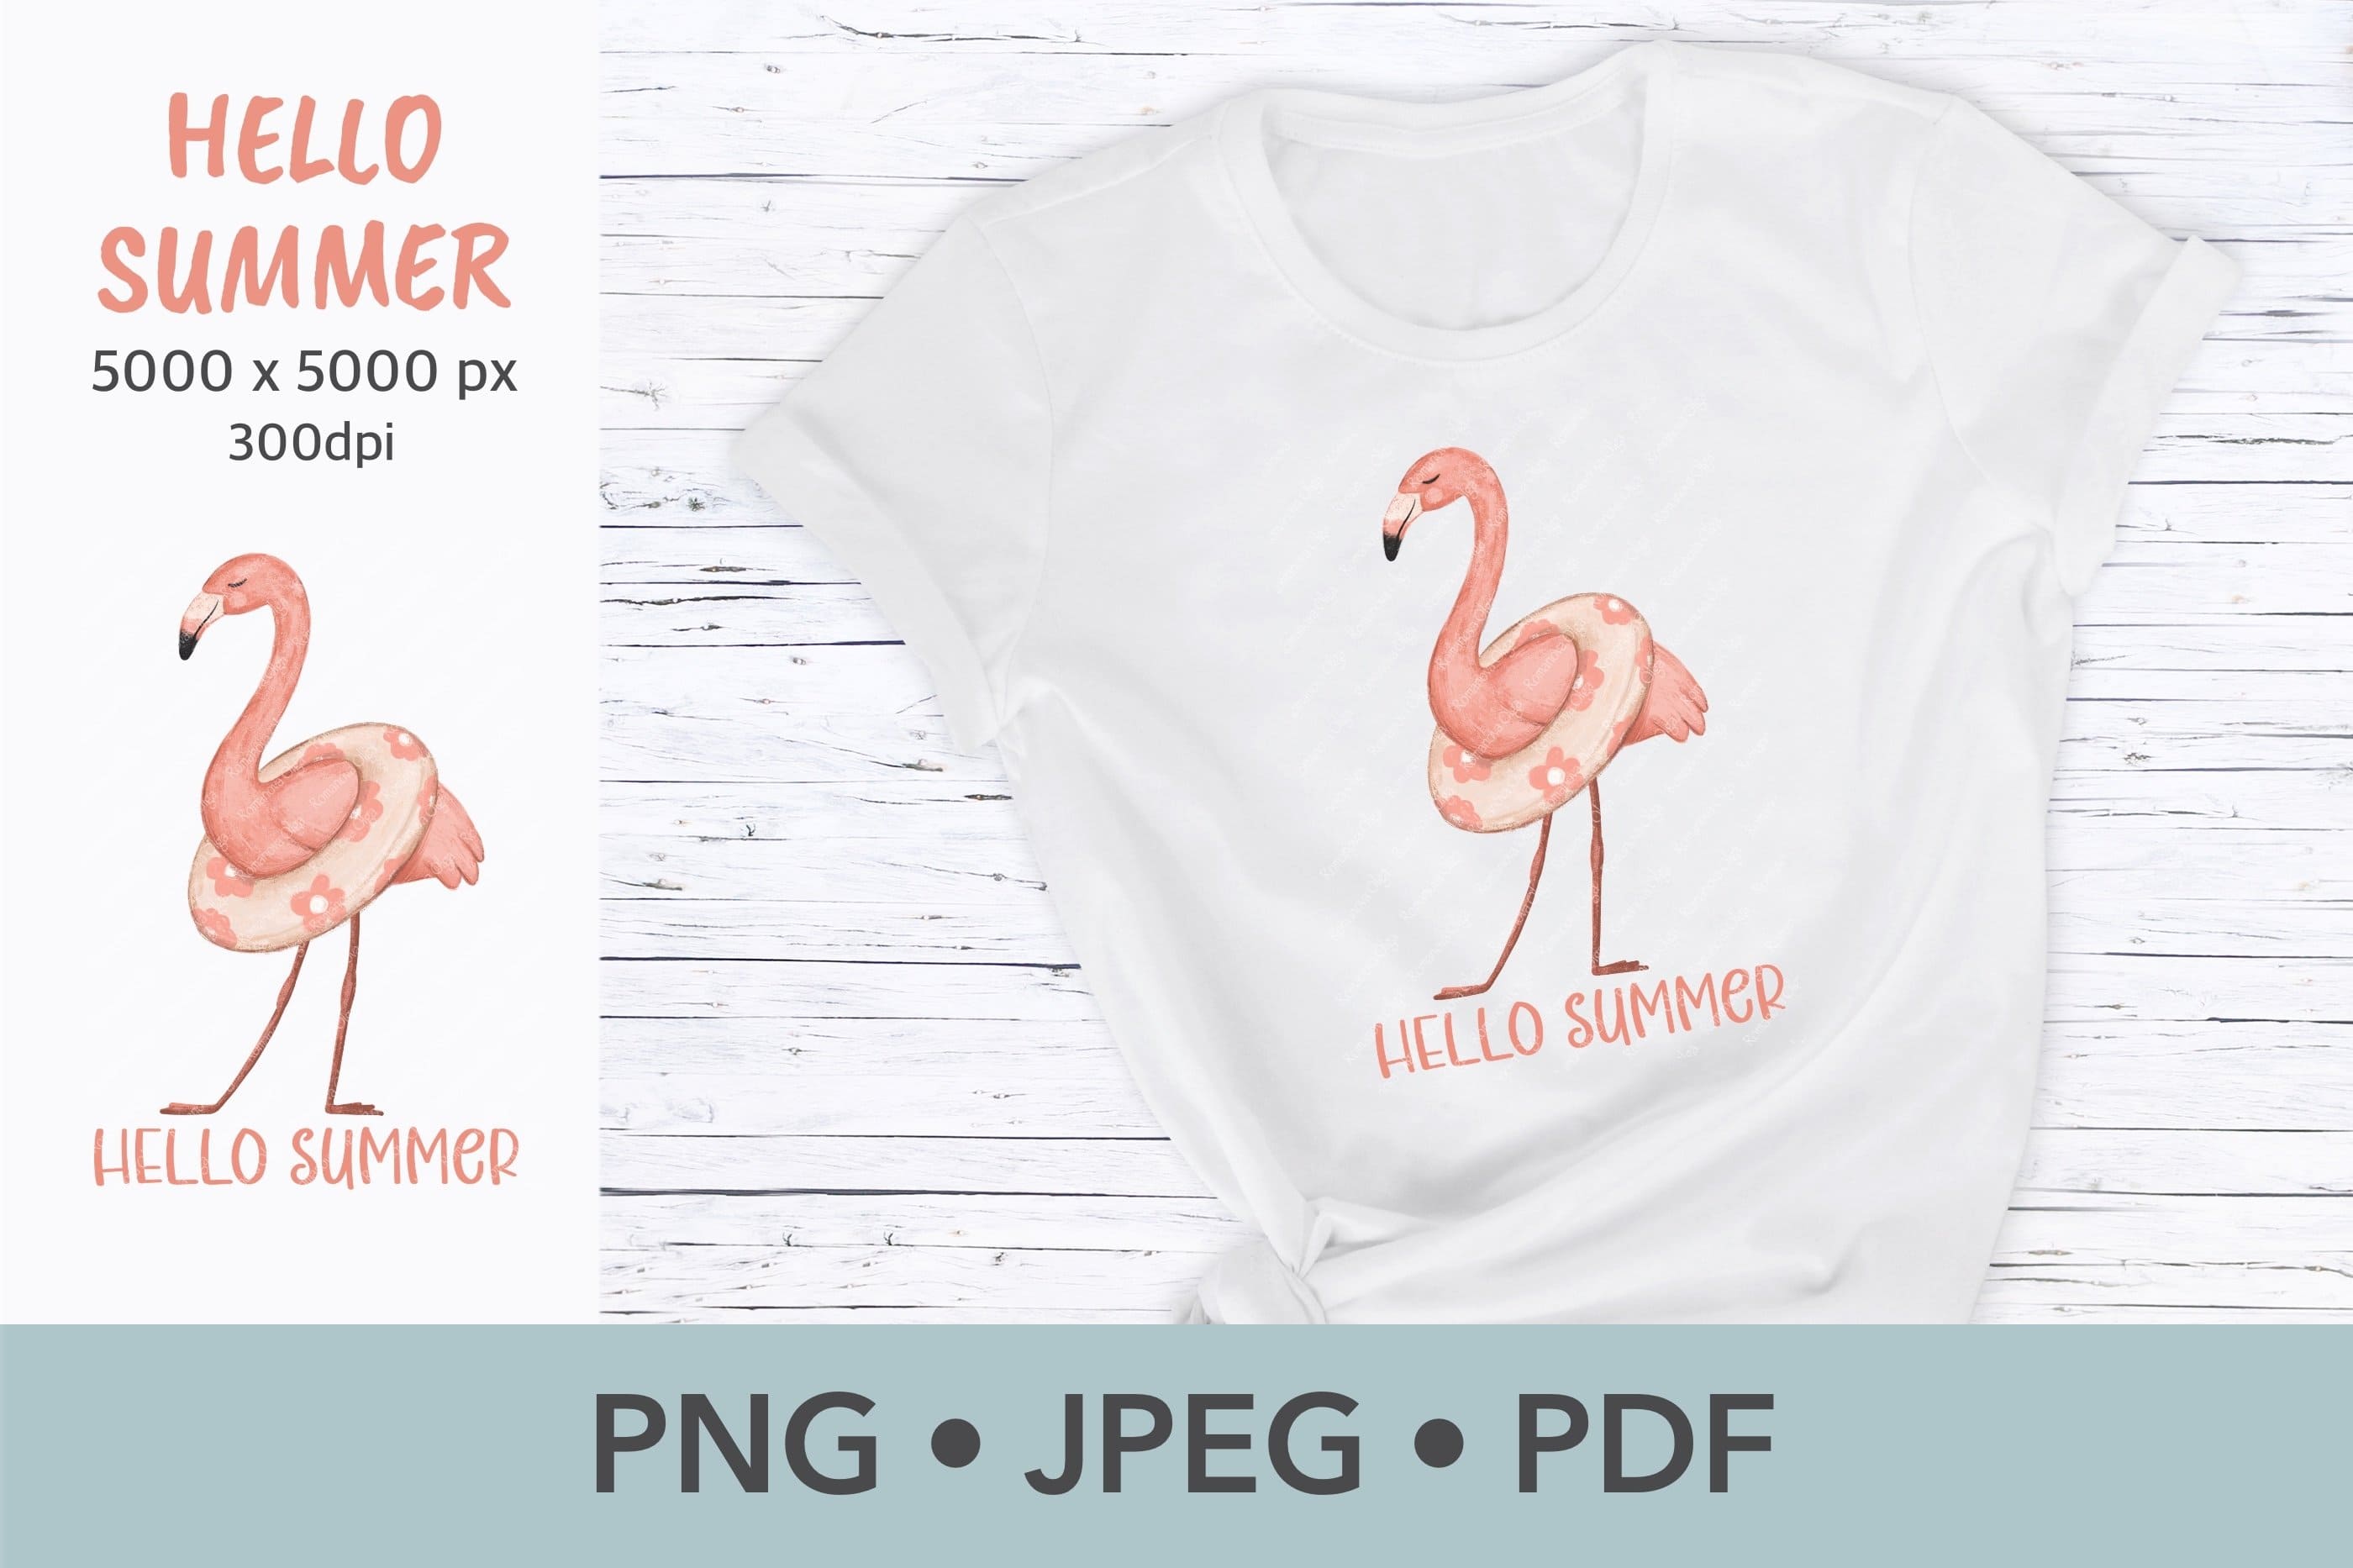 White T-shirt with Flamingo and title: "Hello Summer 5000x5000 px 300 dpi".